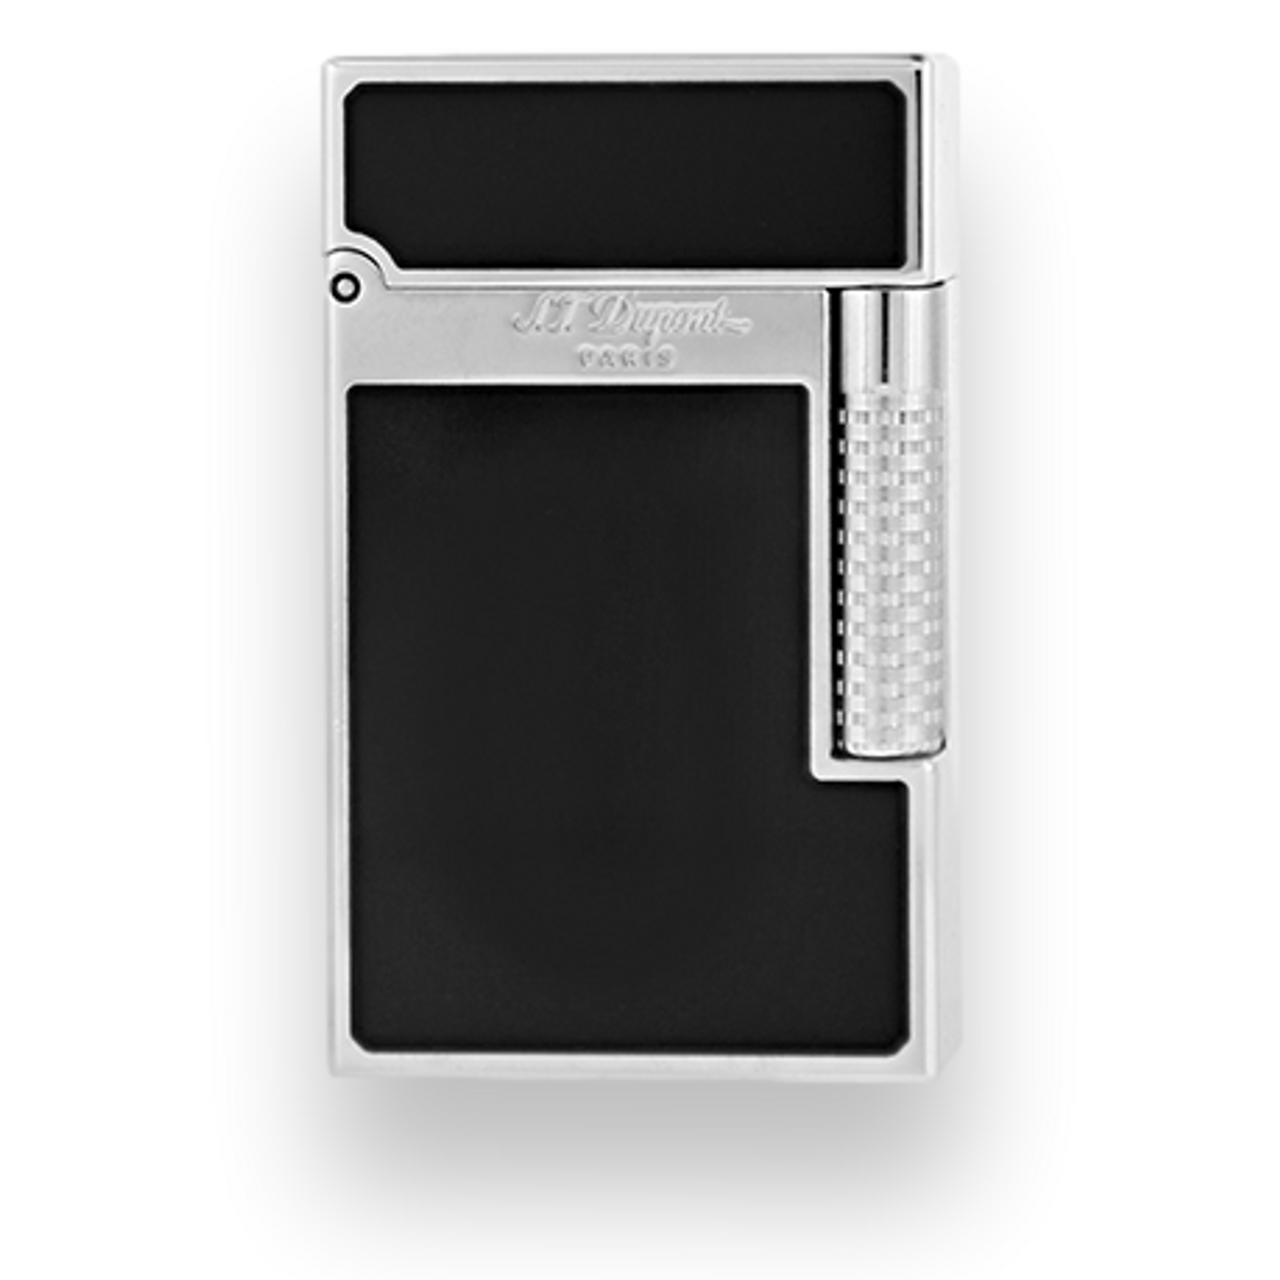 S.T. Dupont Le Grand Cigar Lighters - Cling Series